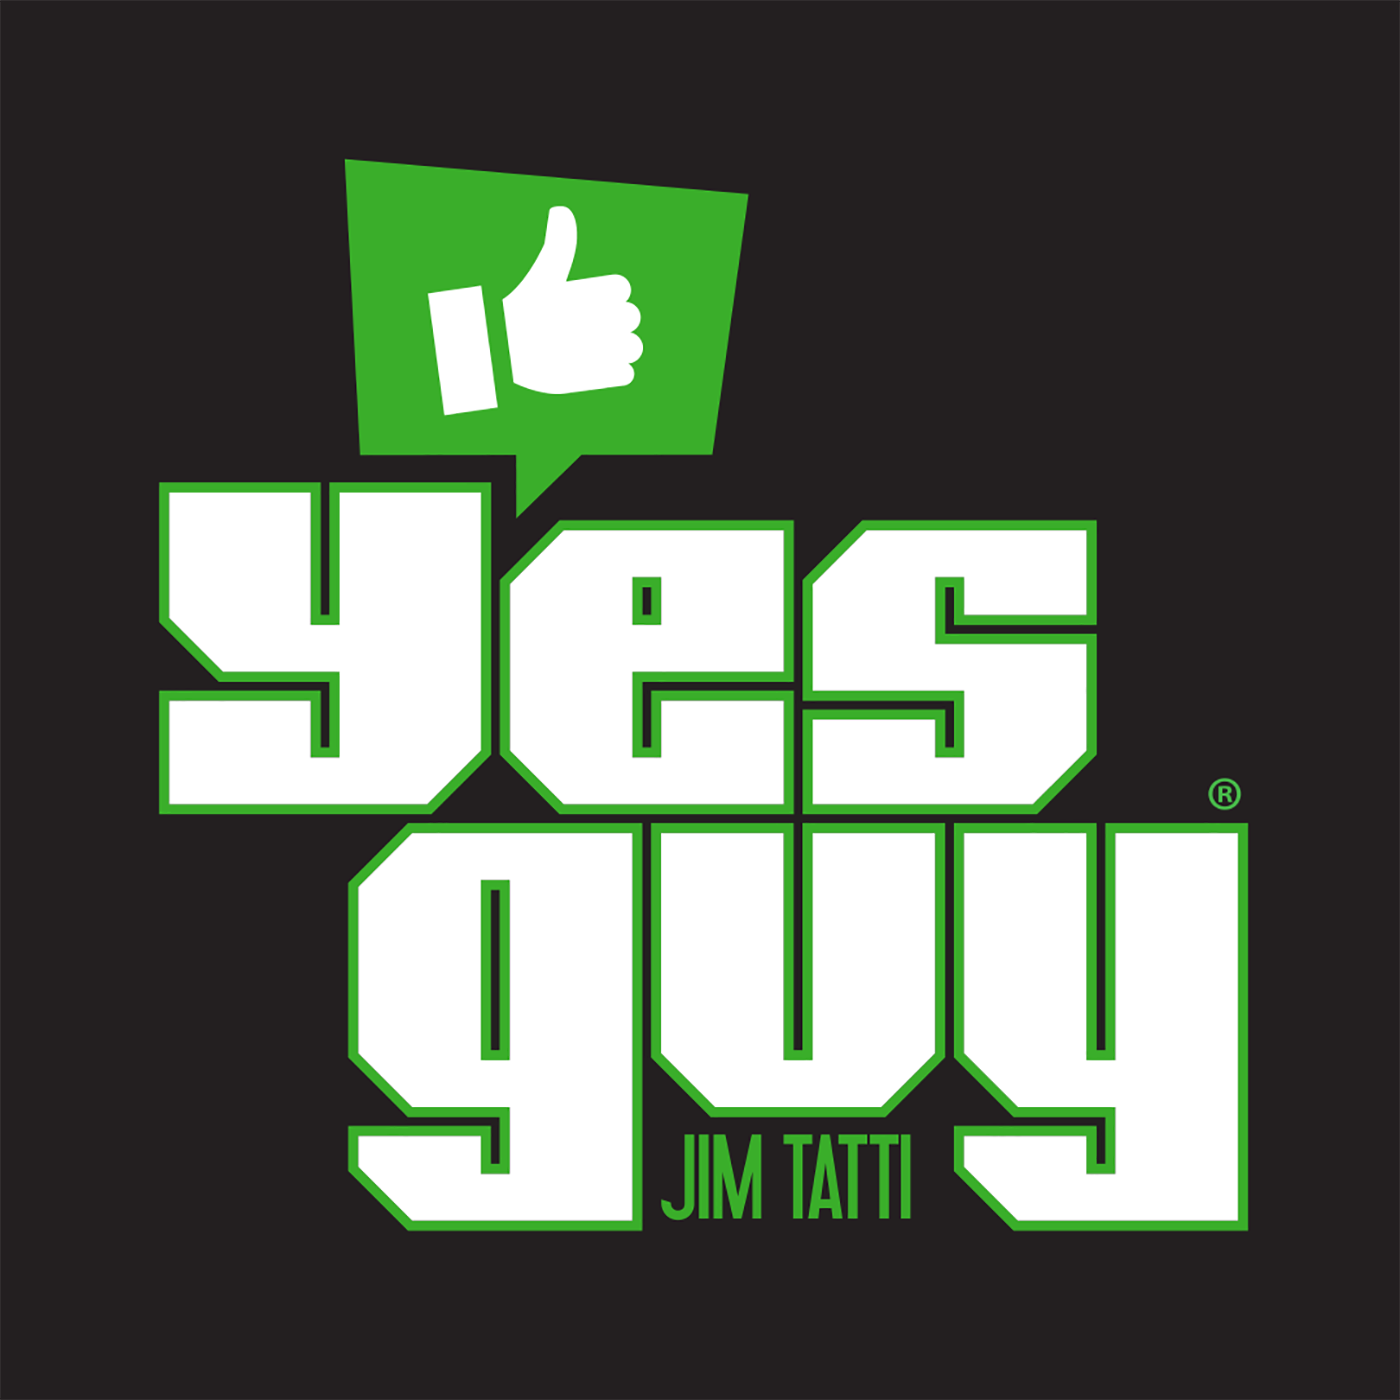 Yes Guy - May 2 - Episode 200